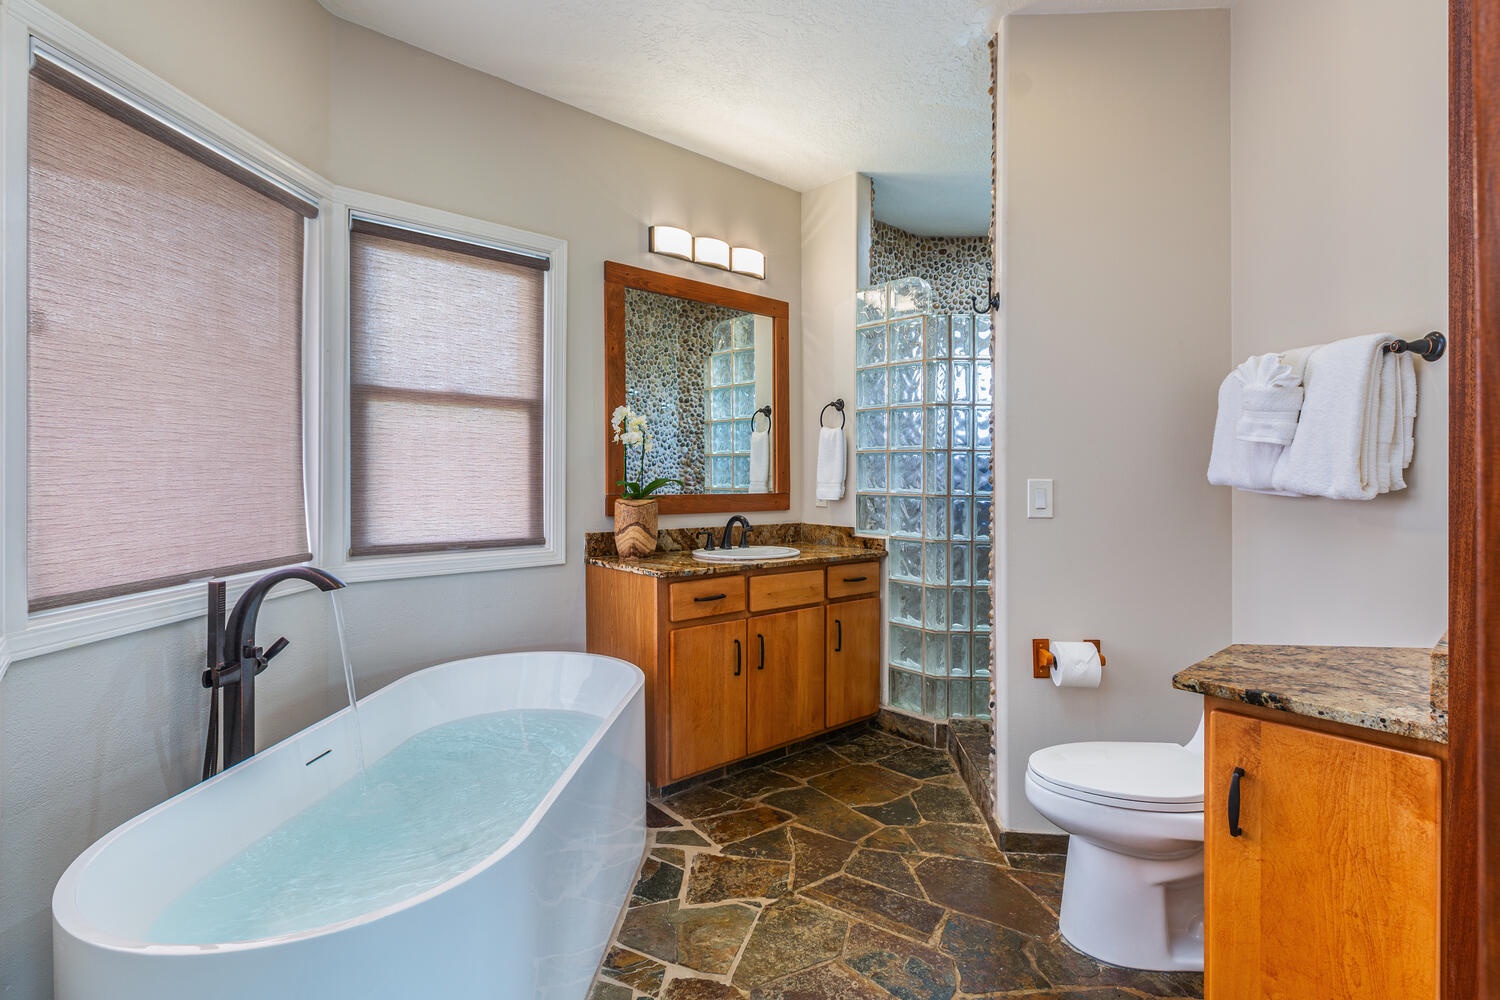 Princeville Vacation Rentals, Pohaku Villa - Soak up in the ensuite bathroom's large soaking tub with a view.